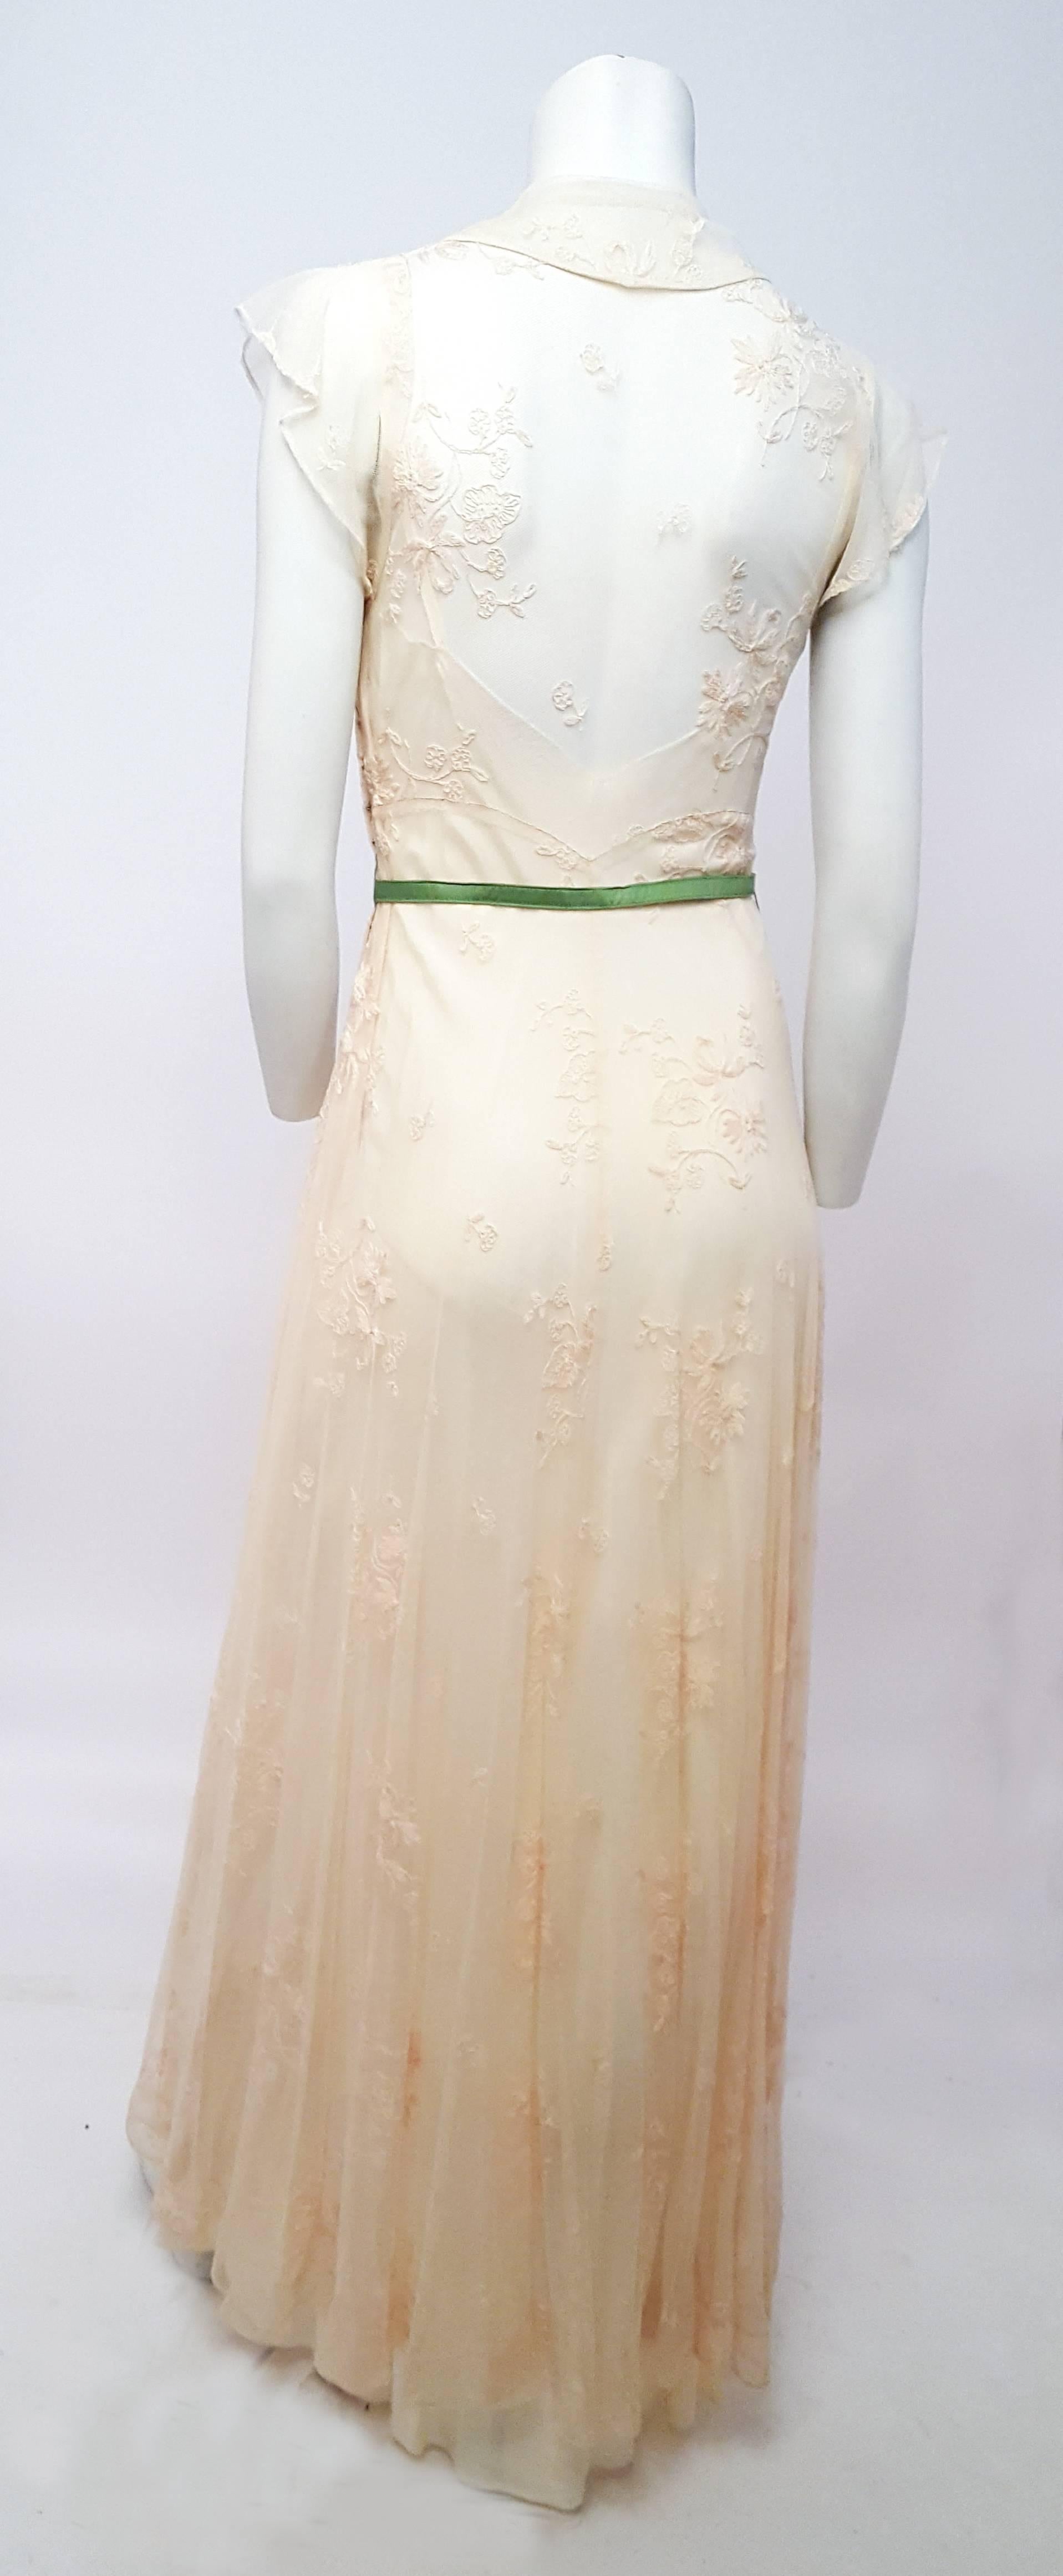 30s Petal Pink Lace Mesh Gown. Slip included. Side snap closure. Belt included, not original. 